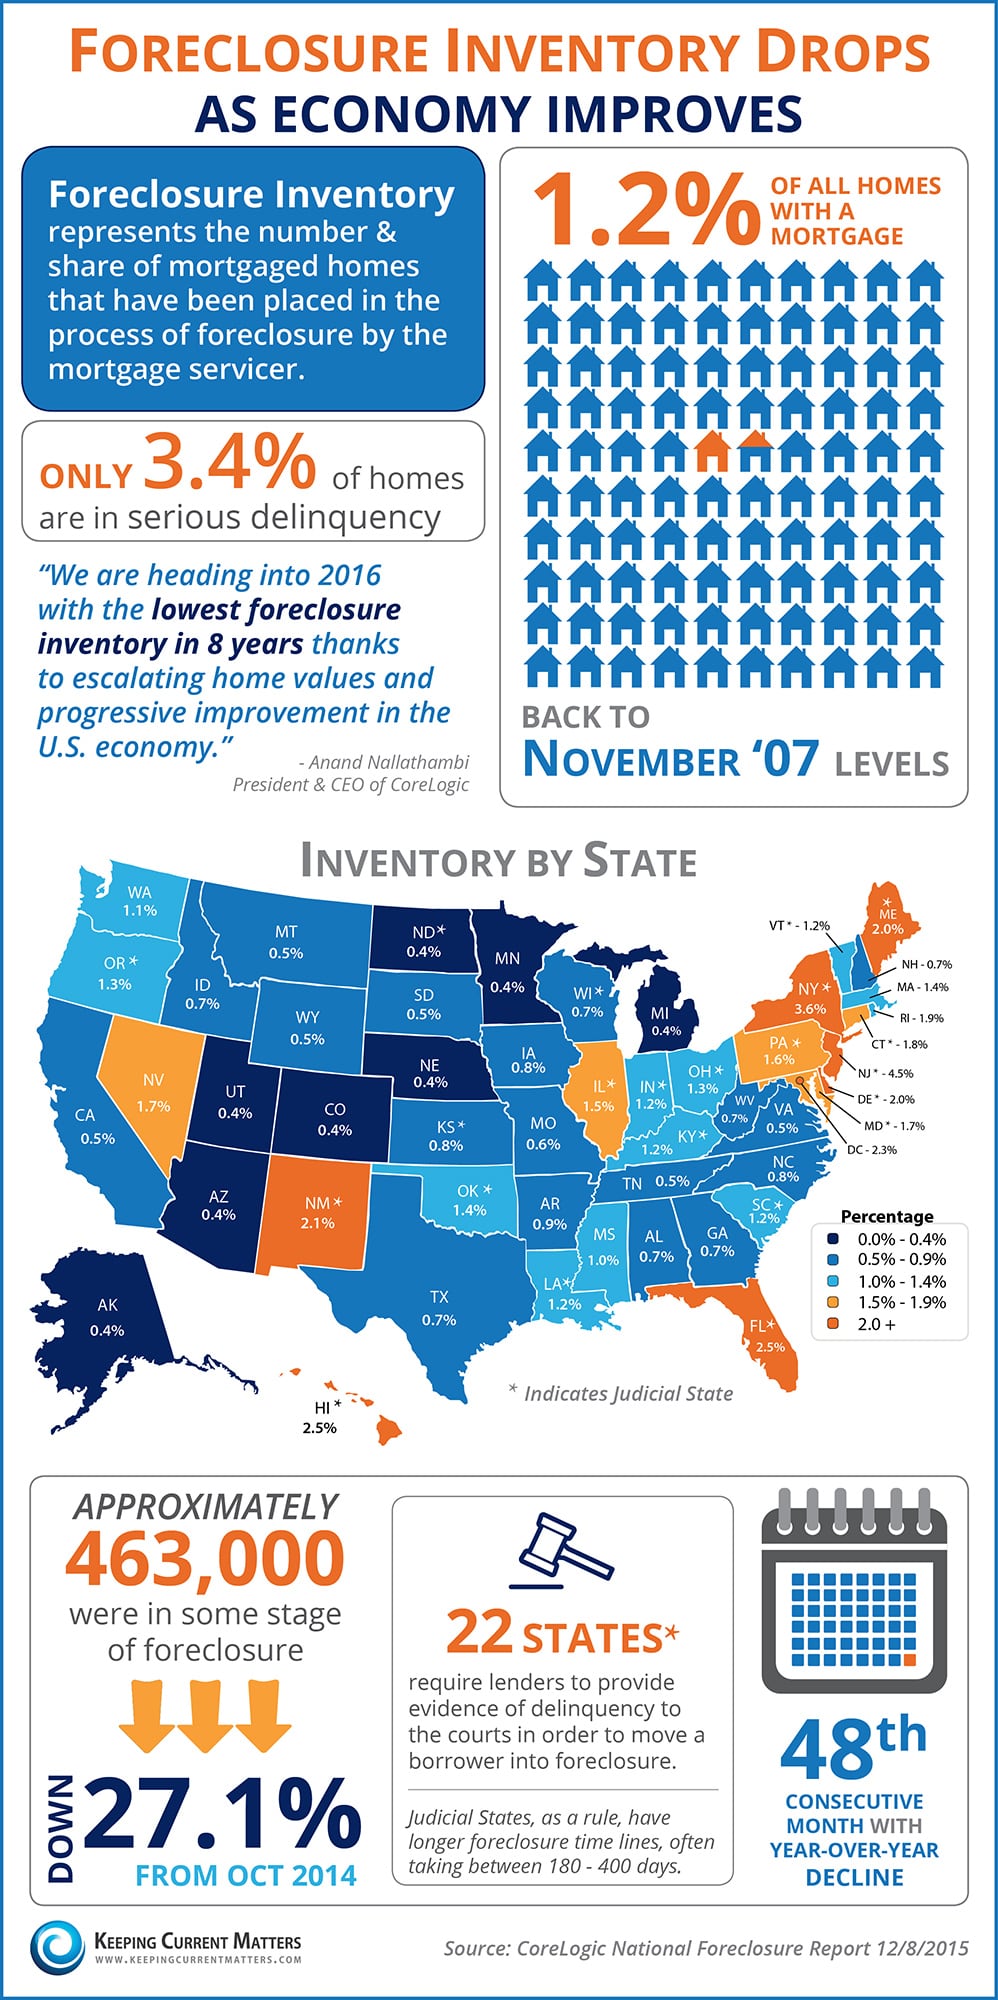 Foreclosure Inventory Drops